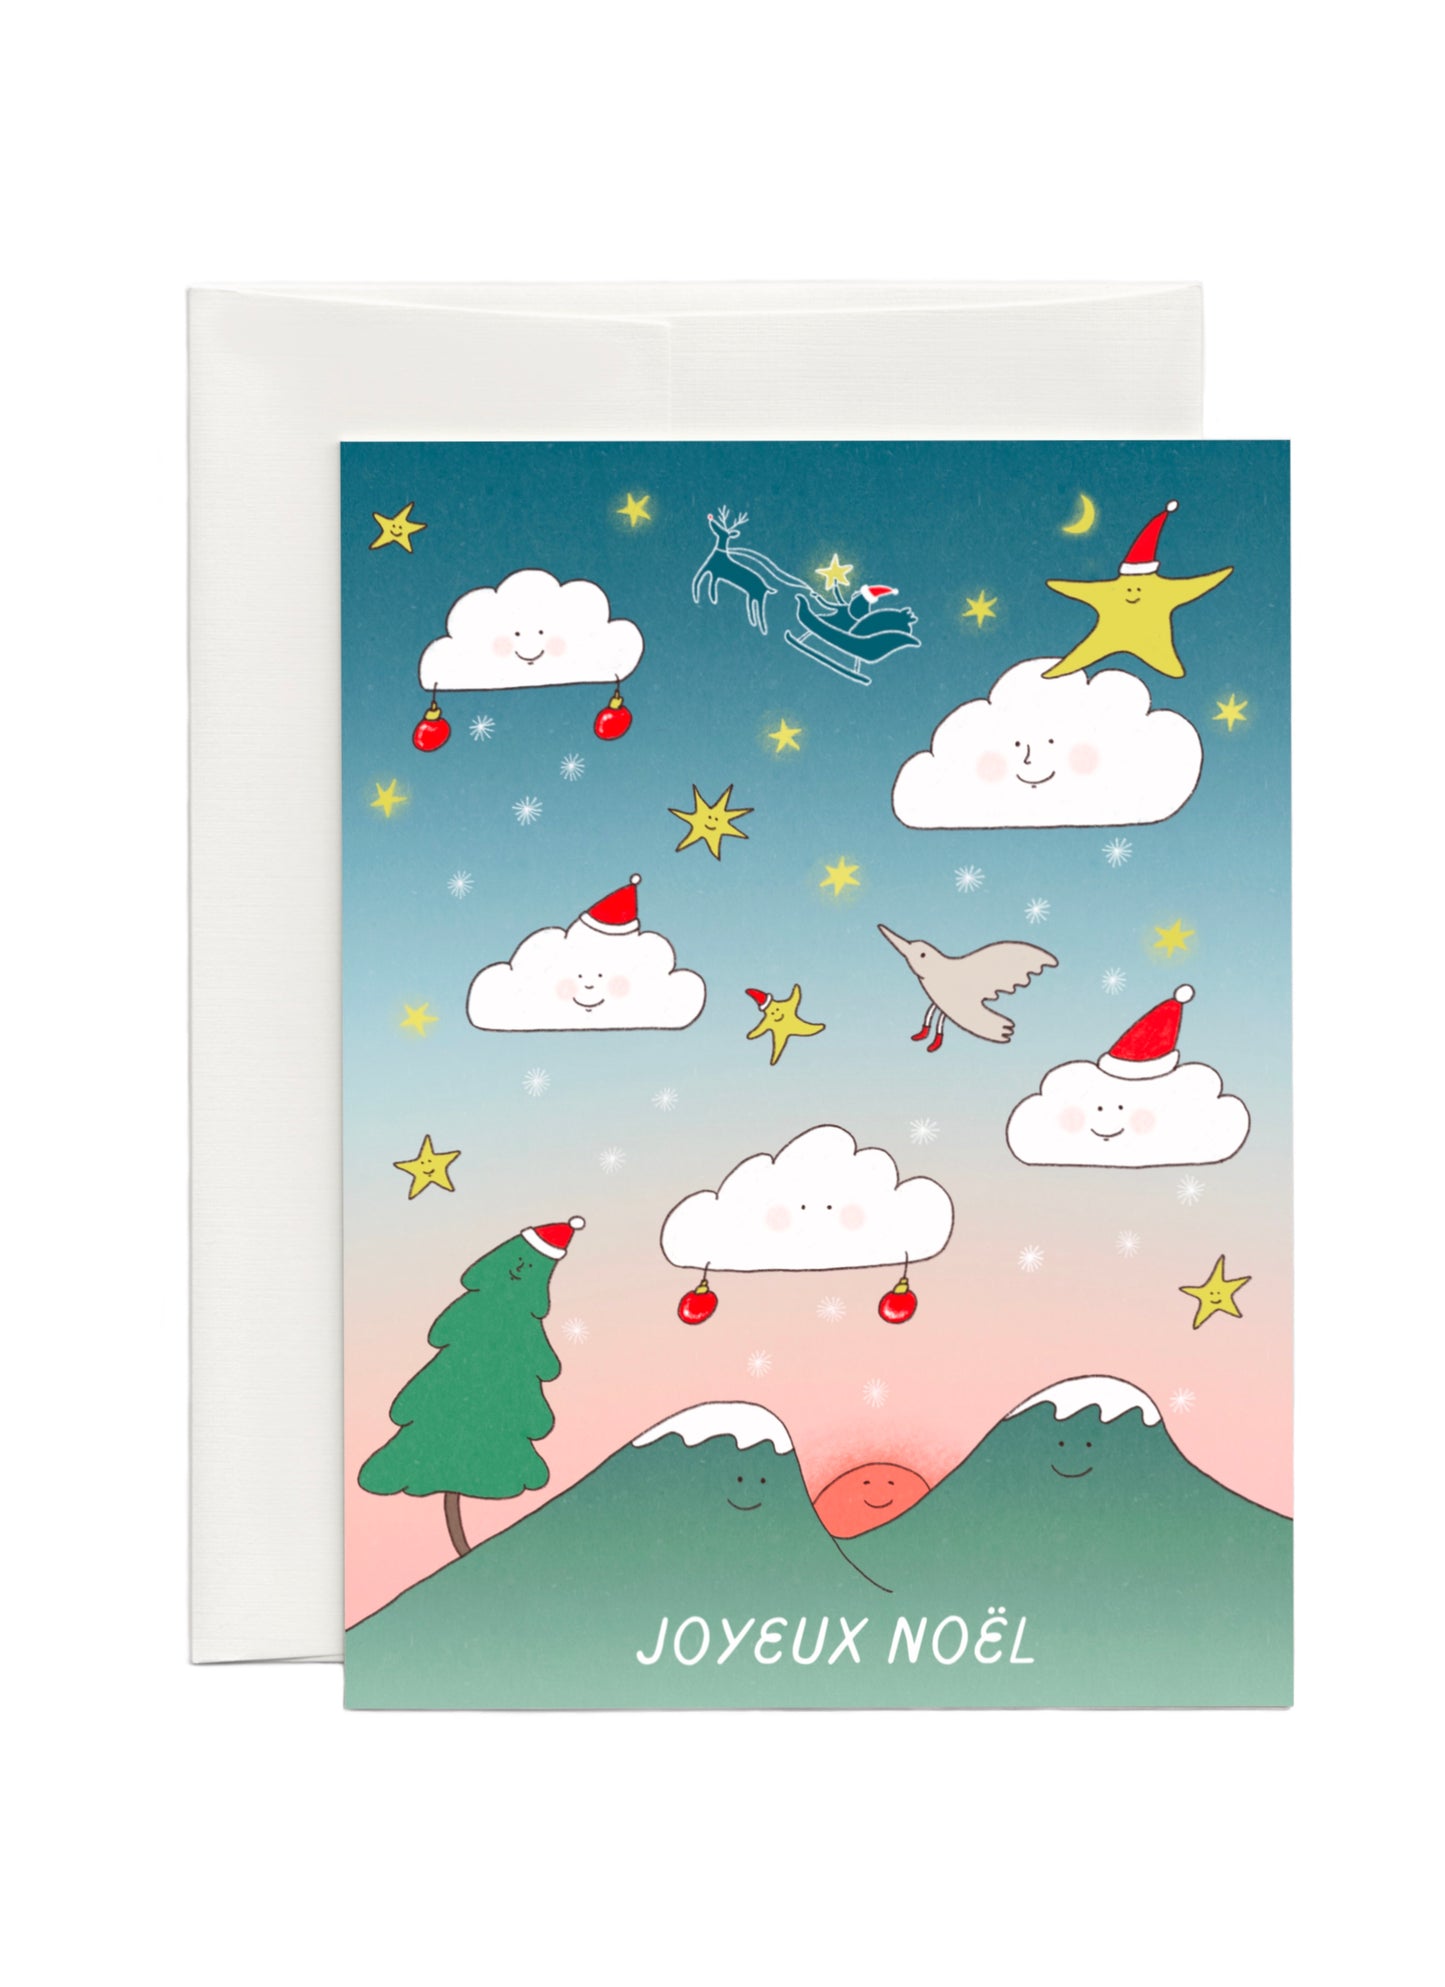 Cute french Christmas Card with clouds with faces floating in the gradient sky along with stars, snow flakes above the mountains